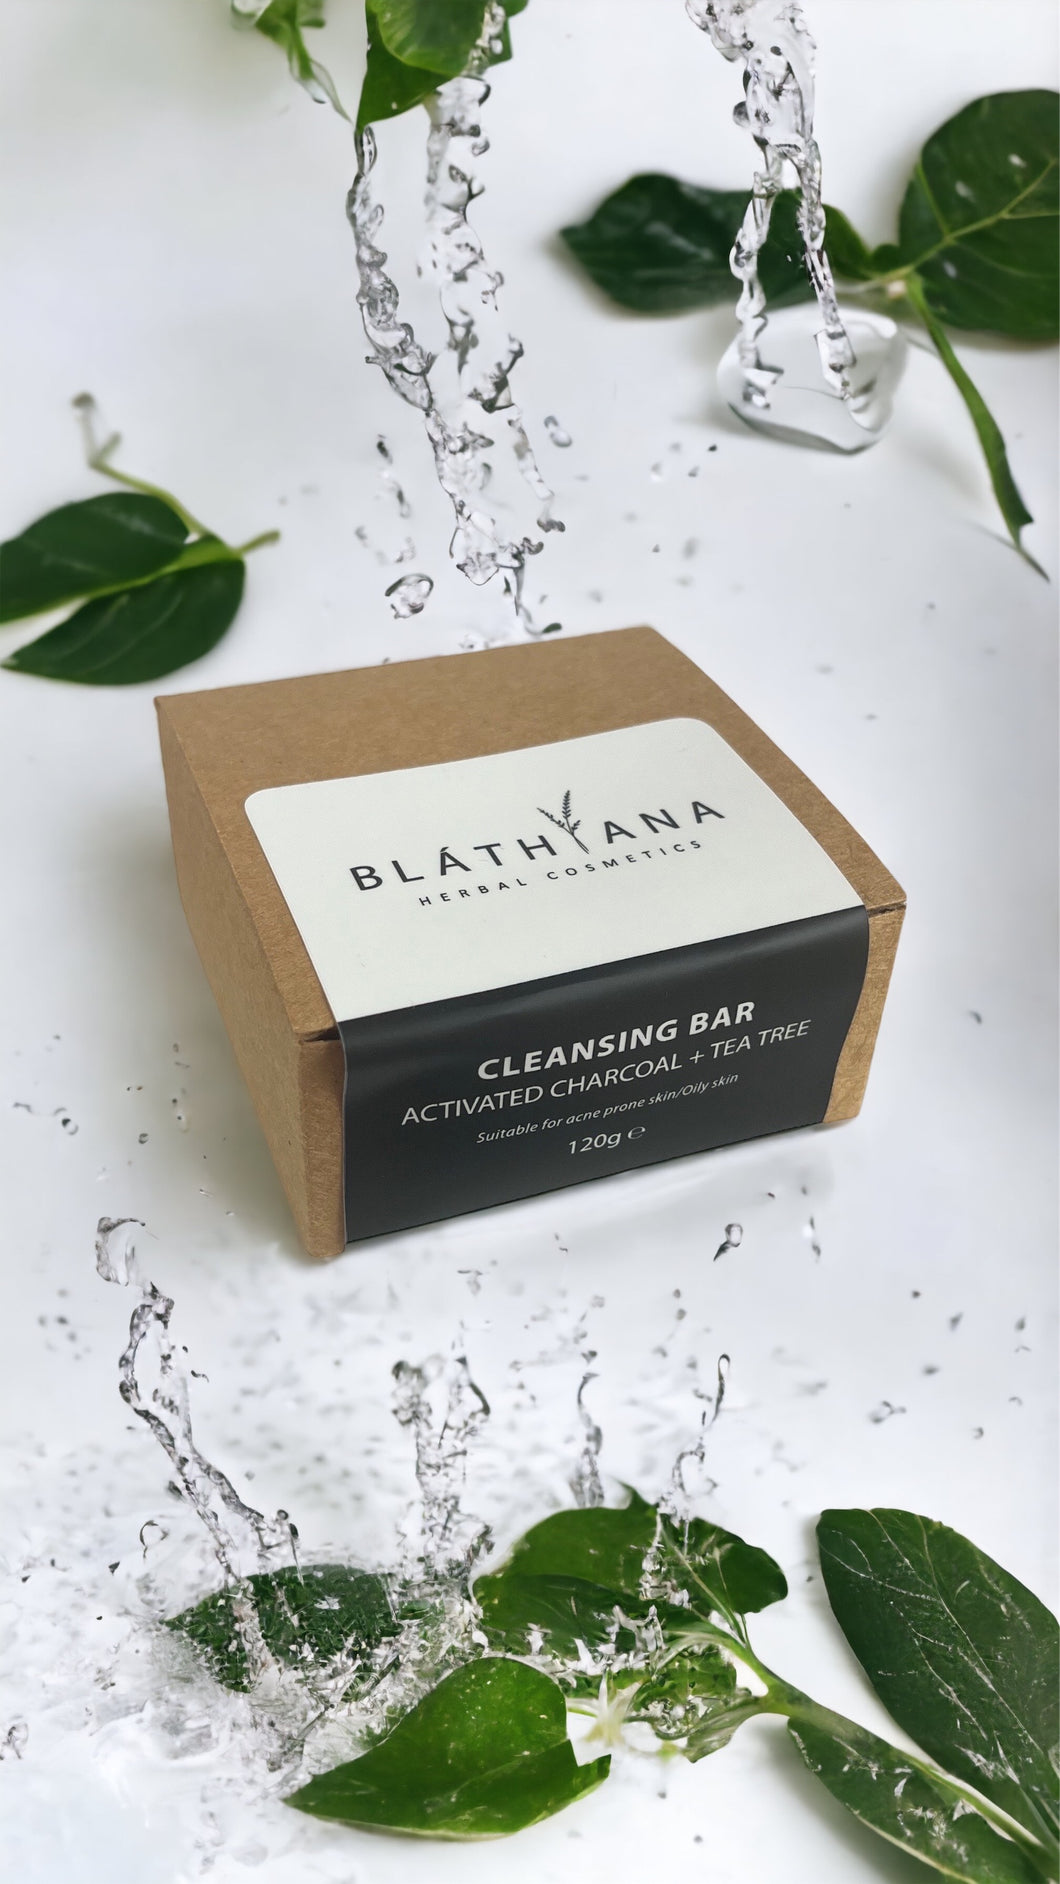 ACTIVATED CHARCOAL + TEA TREE OIL CLEANSING BAR